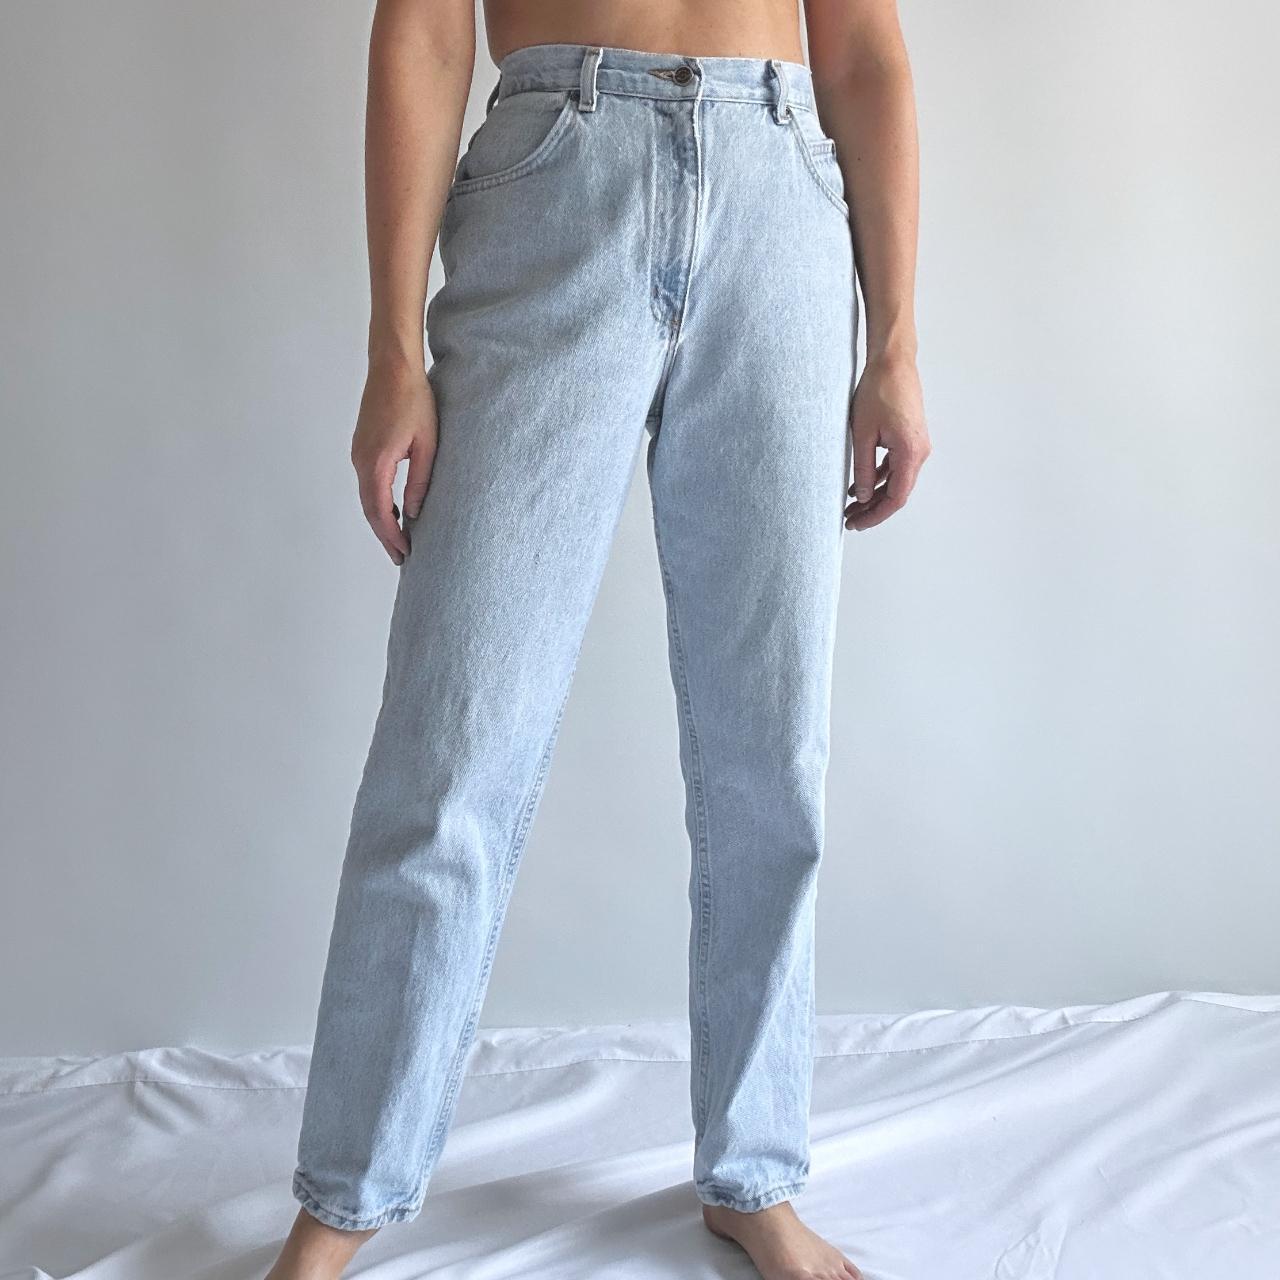 Vintage High Waisted Jeans (Size 29) Size 8, 29